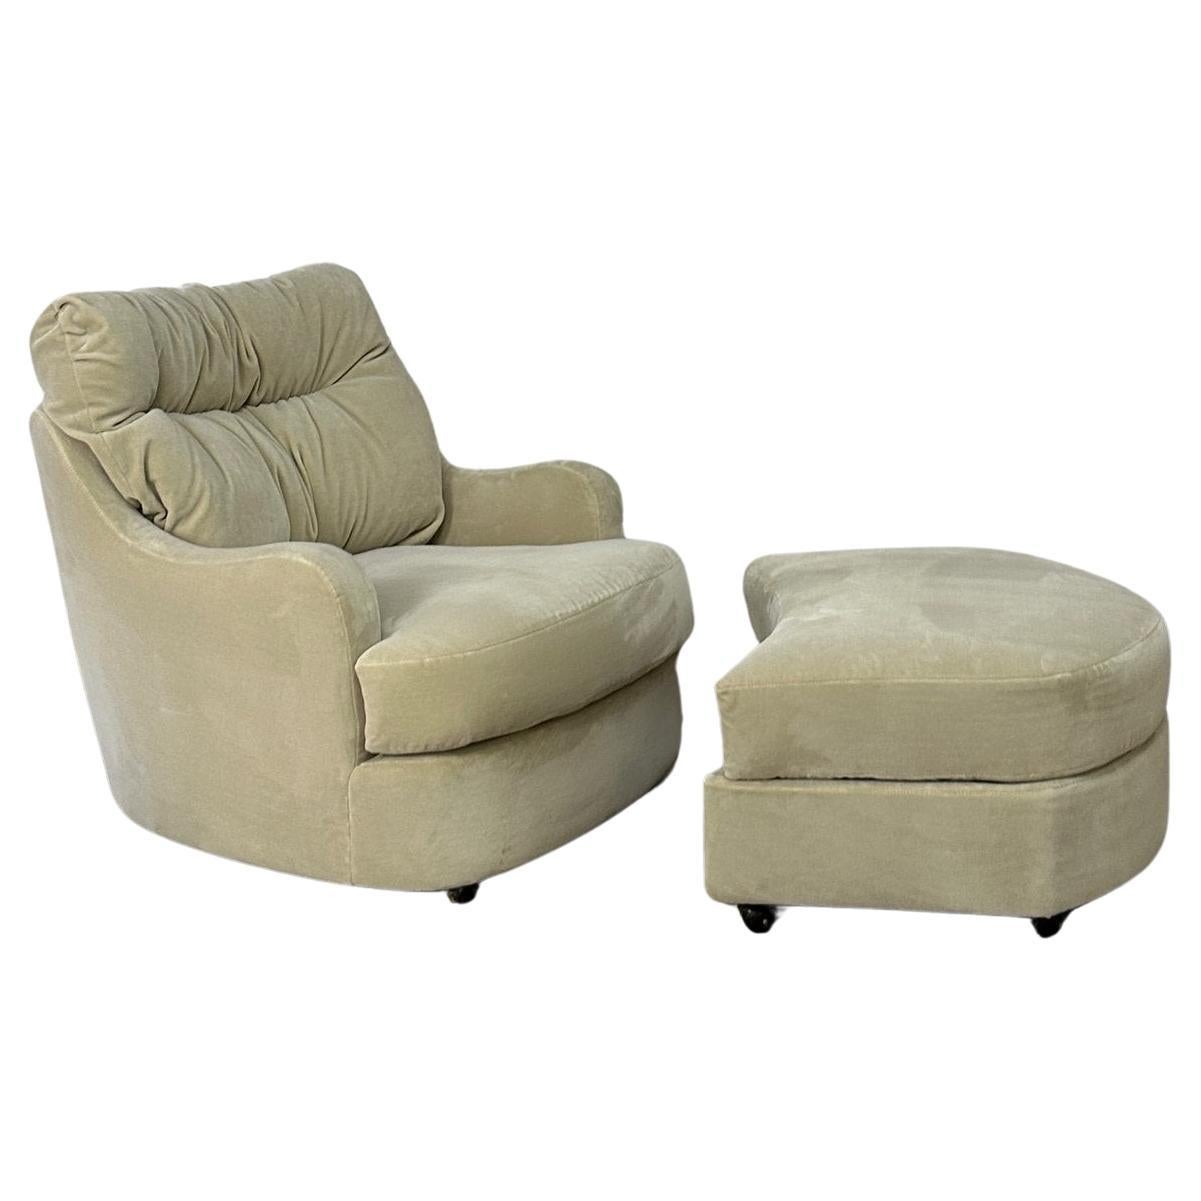 Oversized Lounge chair and ottoman